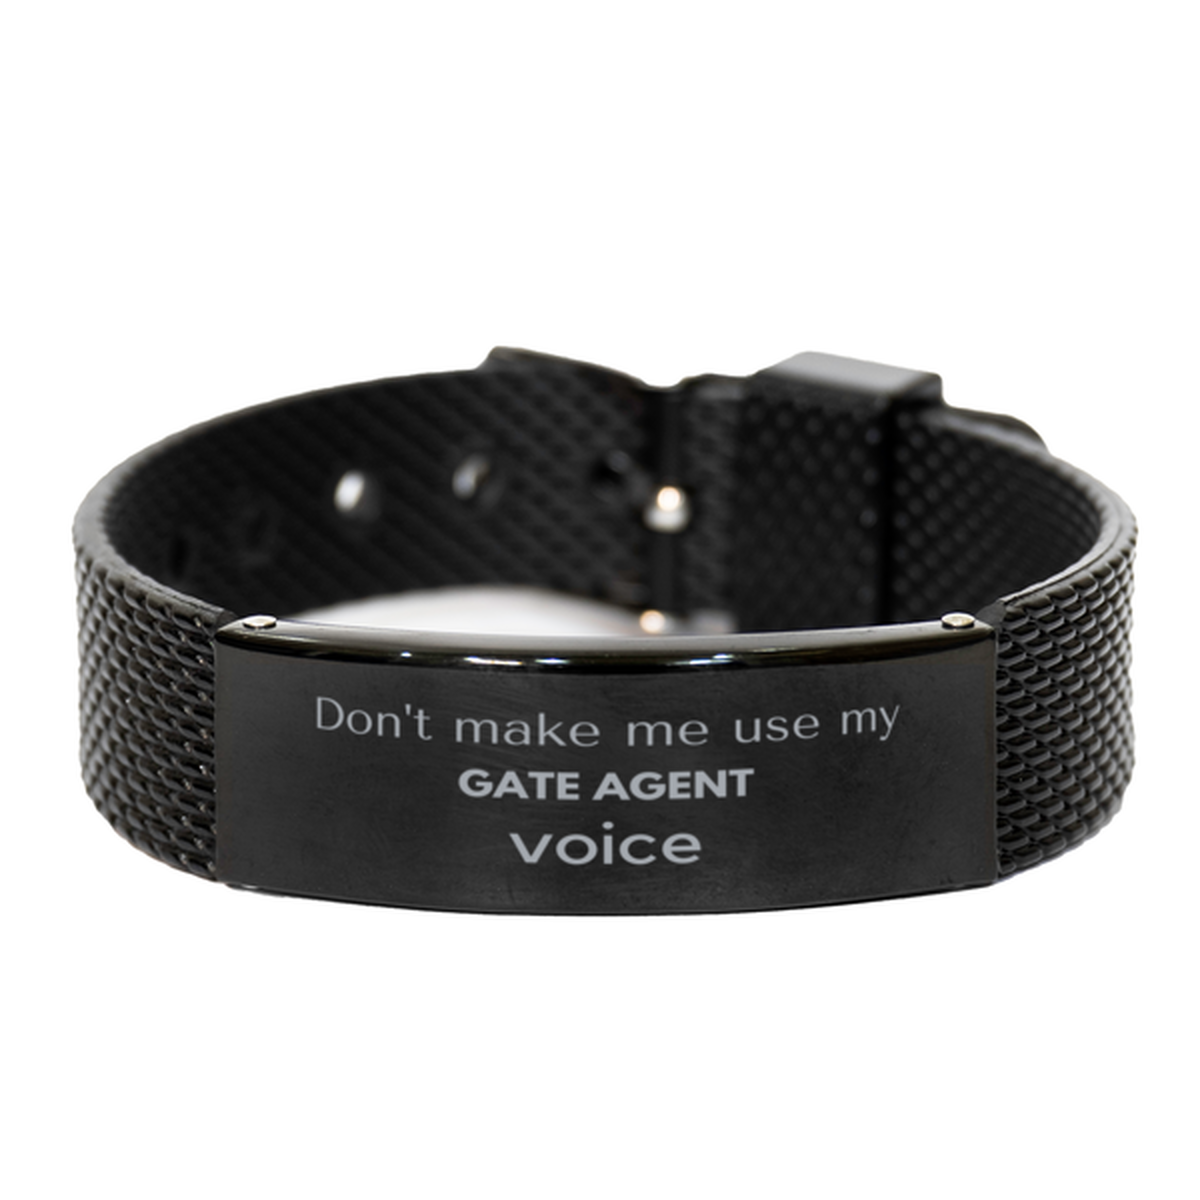 Don't make me use my Gate Agent voice, Sarcasm Gate Agent Gifts, Christmas Gate Agent Black Shark Mesh Bracelet Birthday Unique Gifts For Gate Agent Coworkers, Men, Women, Colleague, Friends